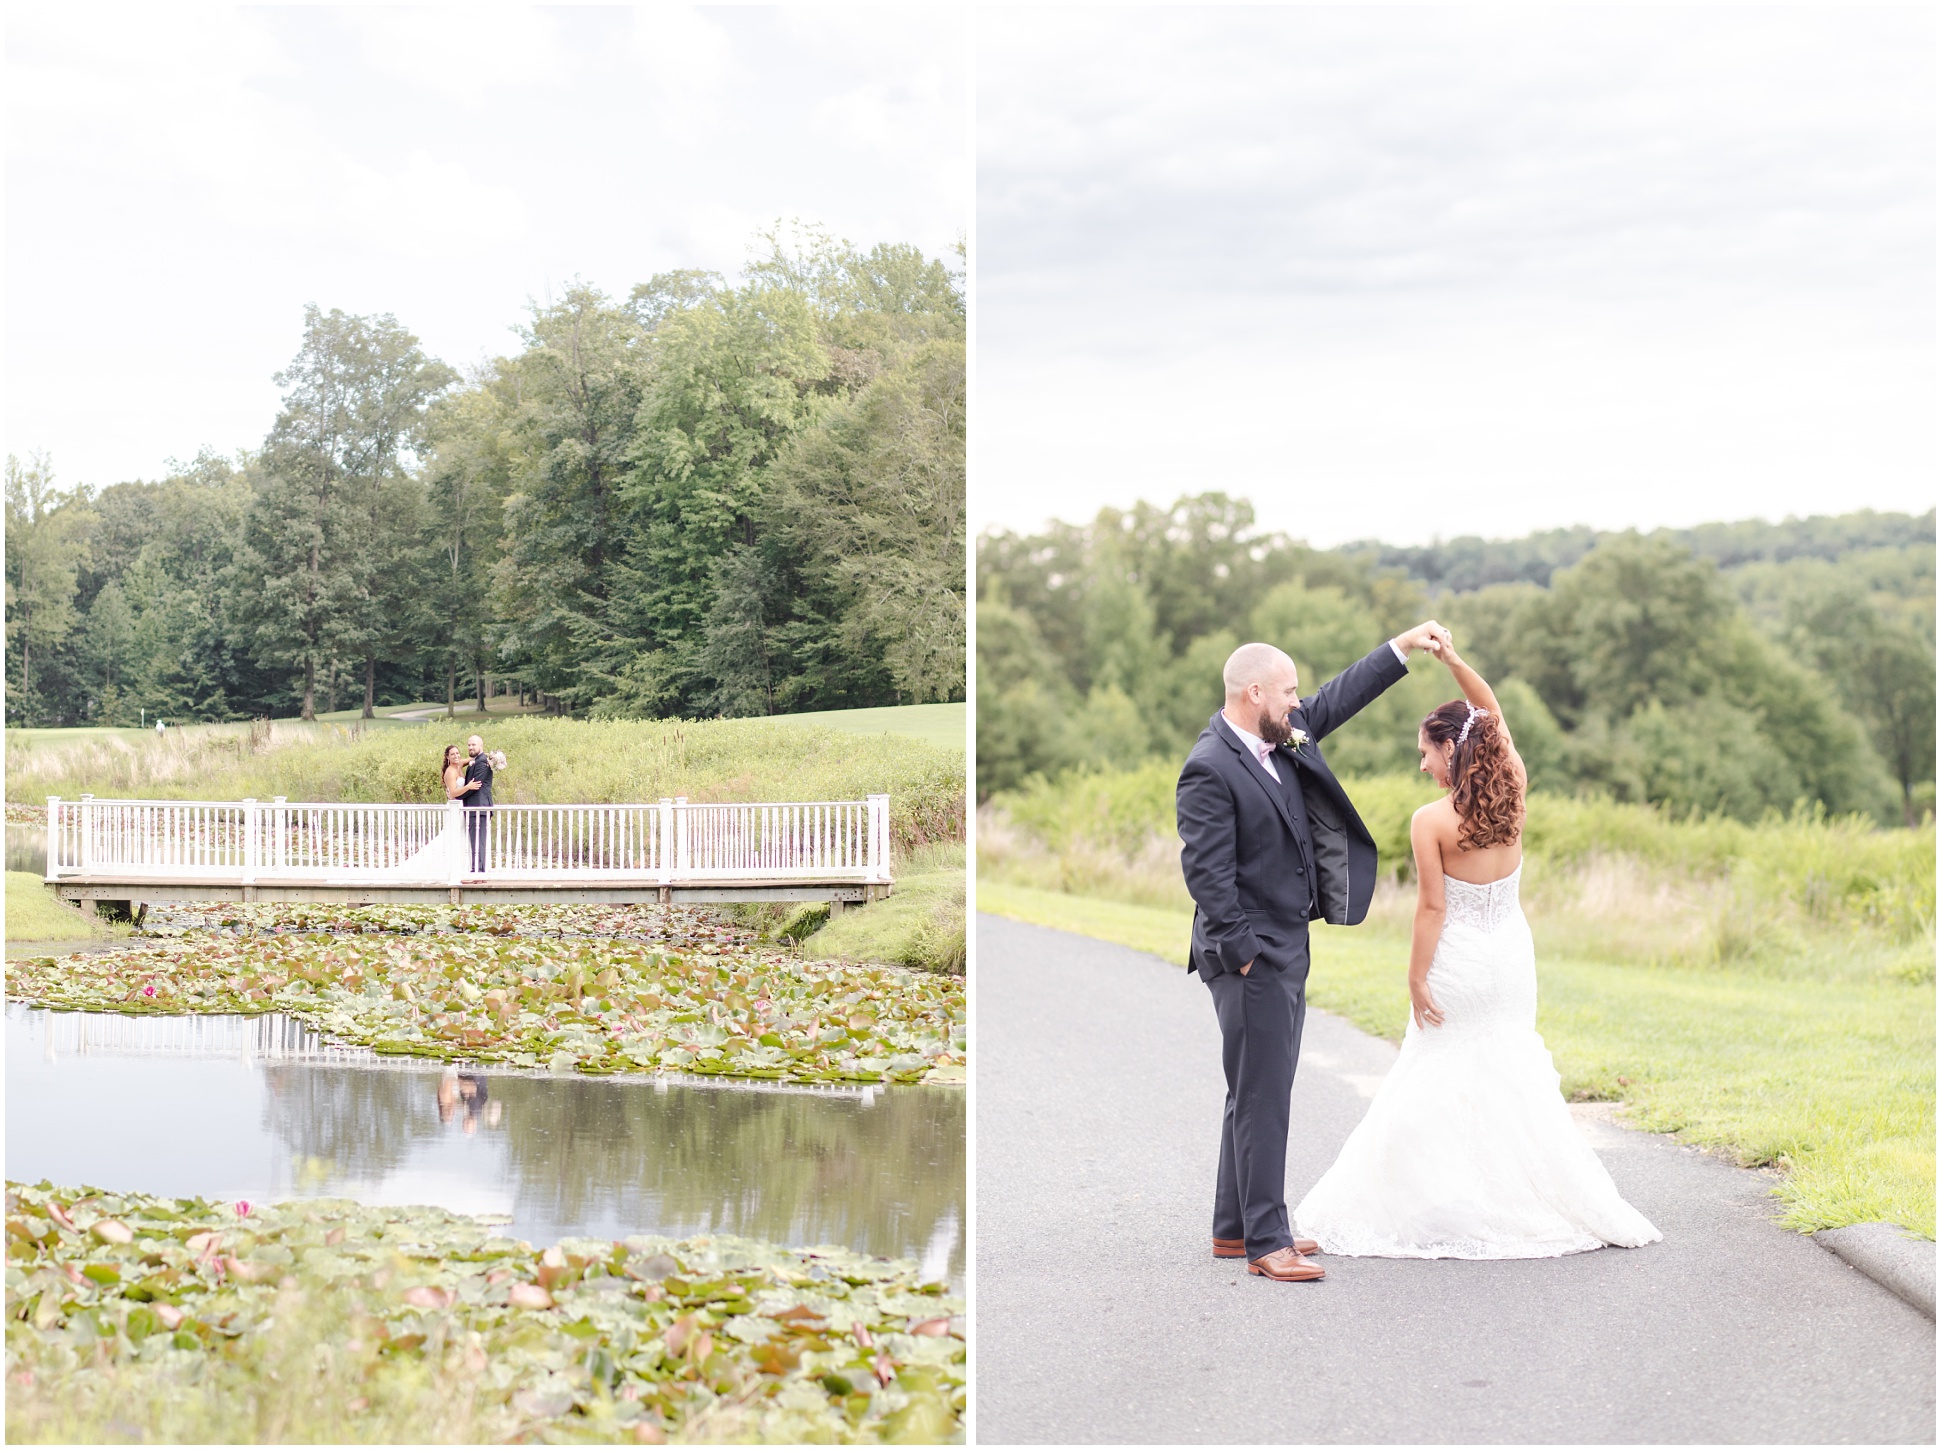 Left: Bride and Groom on the white bridge, right: bride and groom twirling